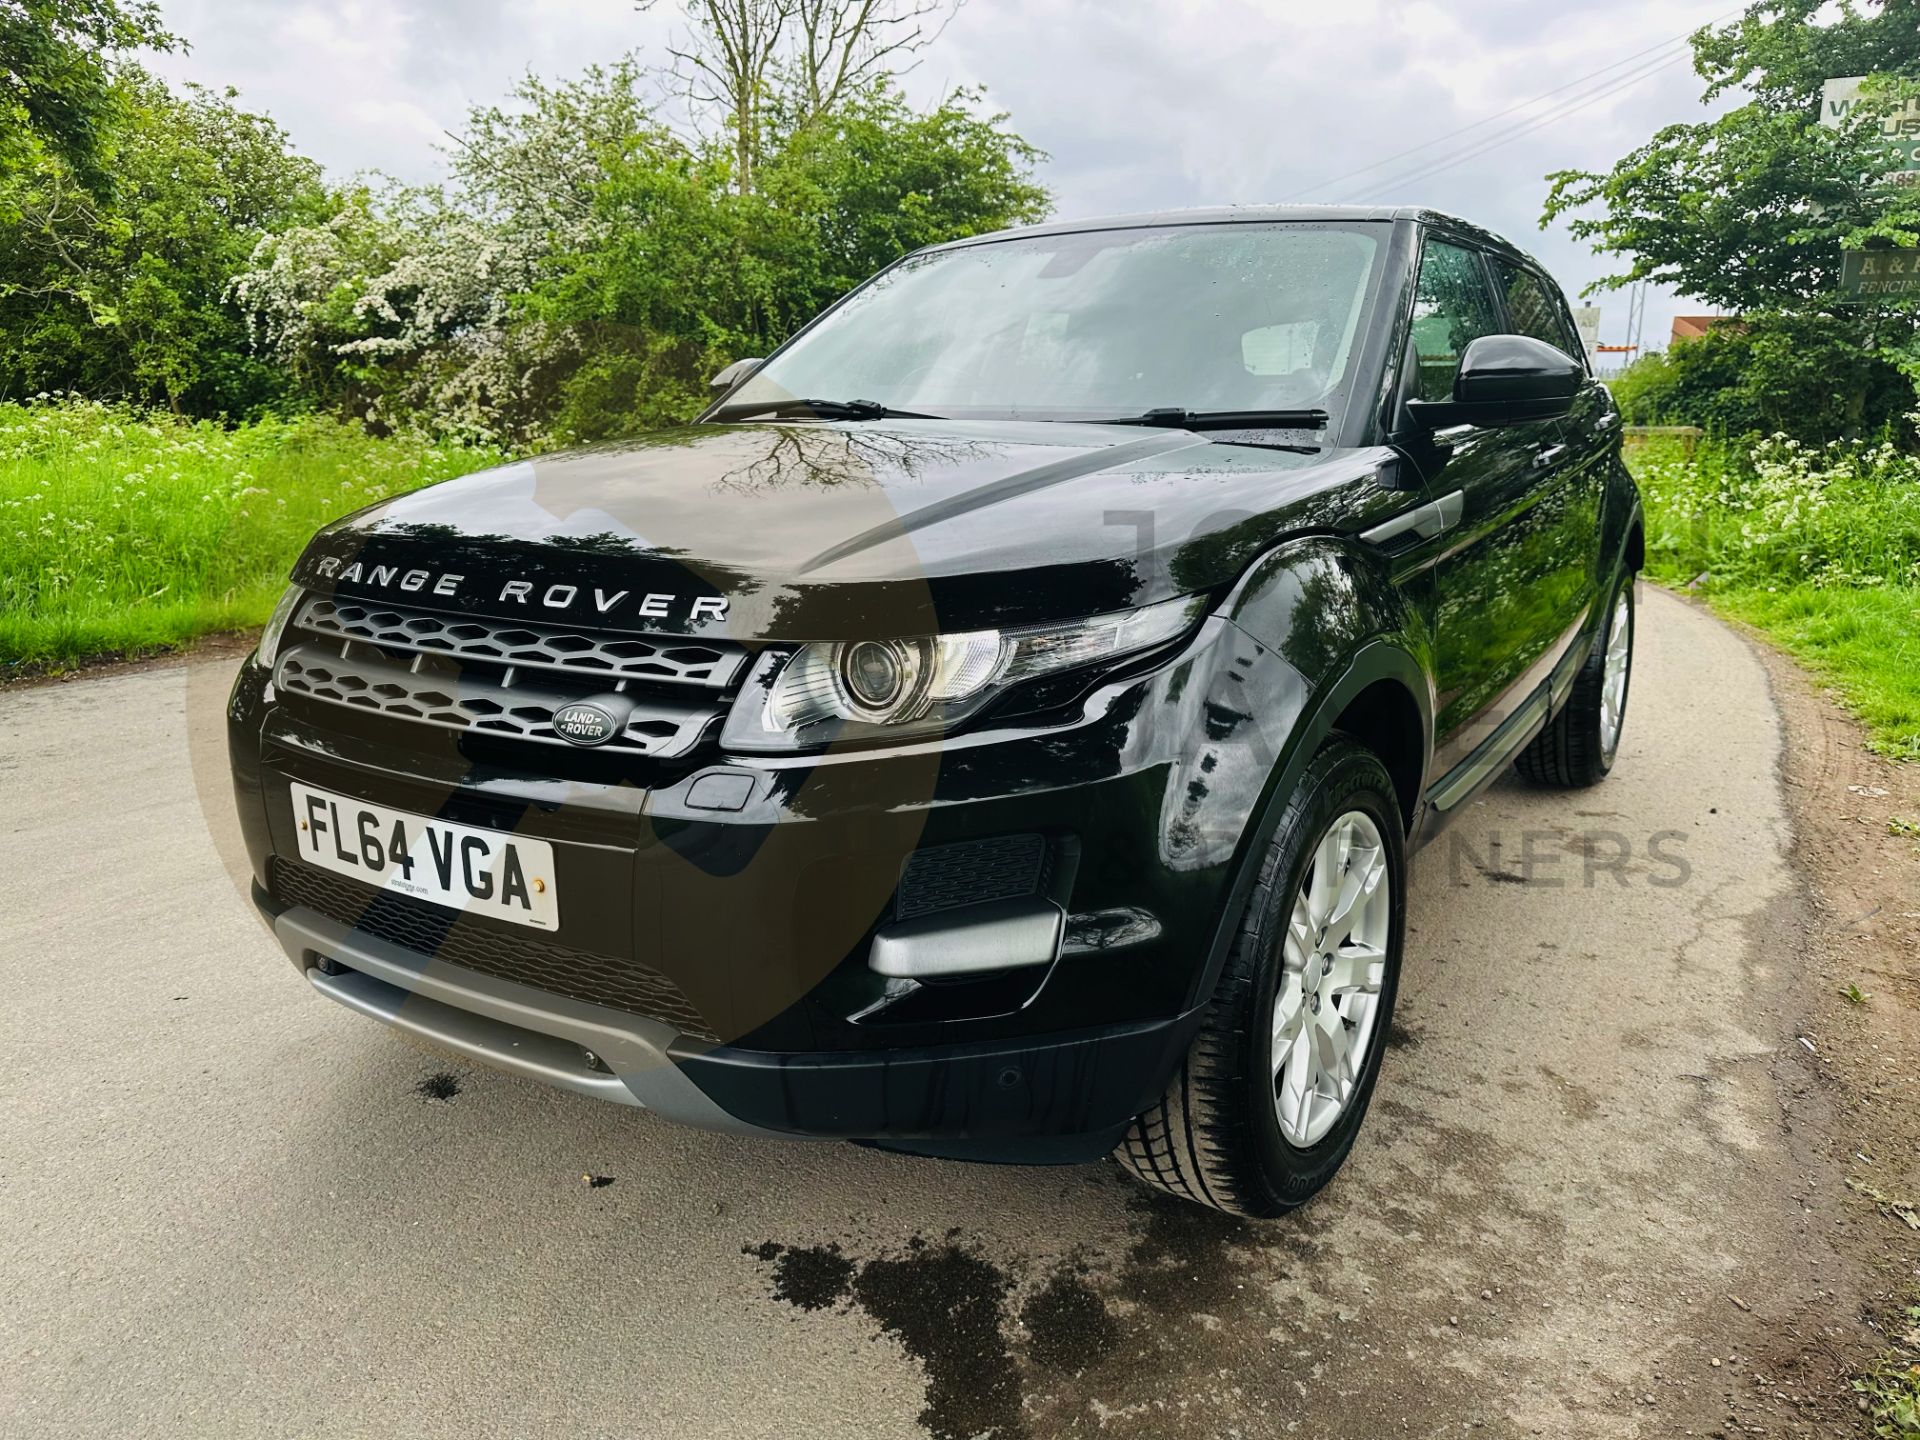 (ON SALE) RANGE ROVER EVOQUE 2.2 ED4 *PURE EDITION* - 2015 MODEL - START / STOP - LEATHER - Image 4 of 39